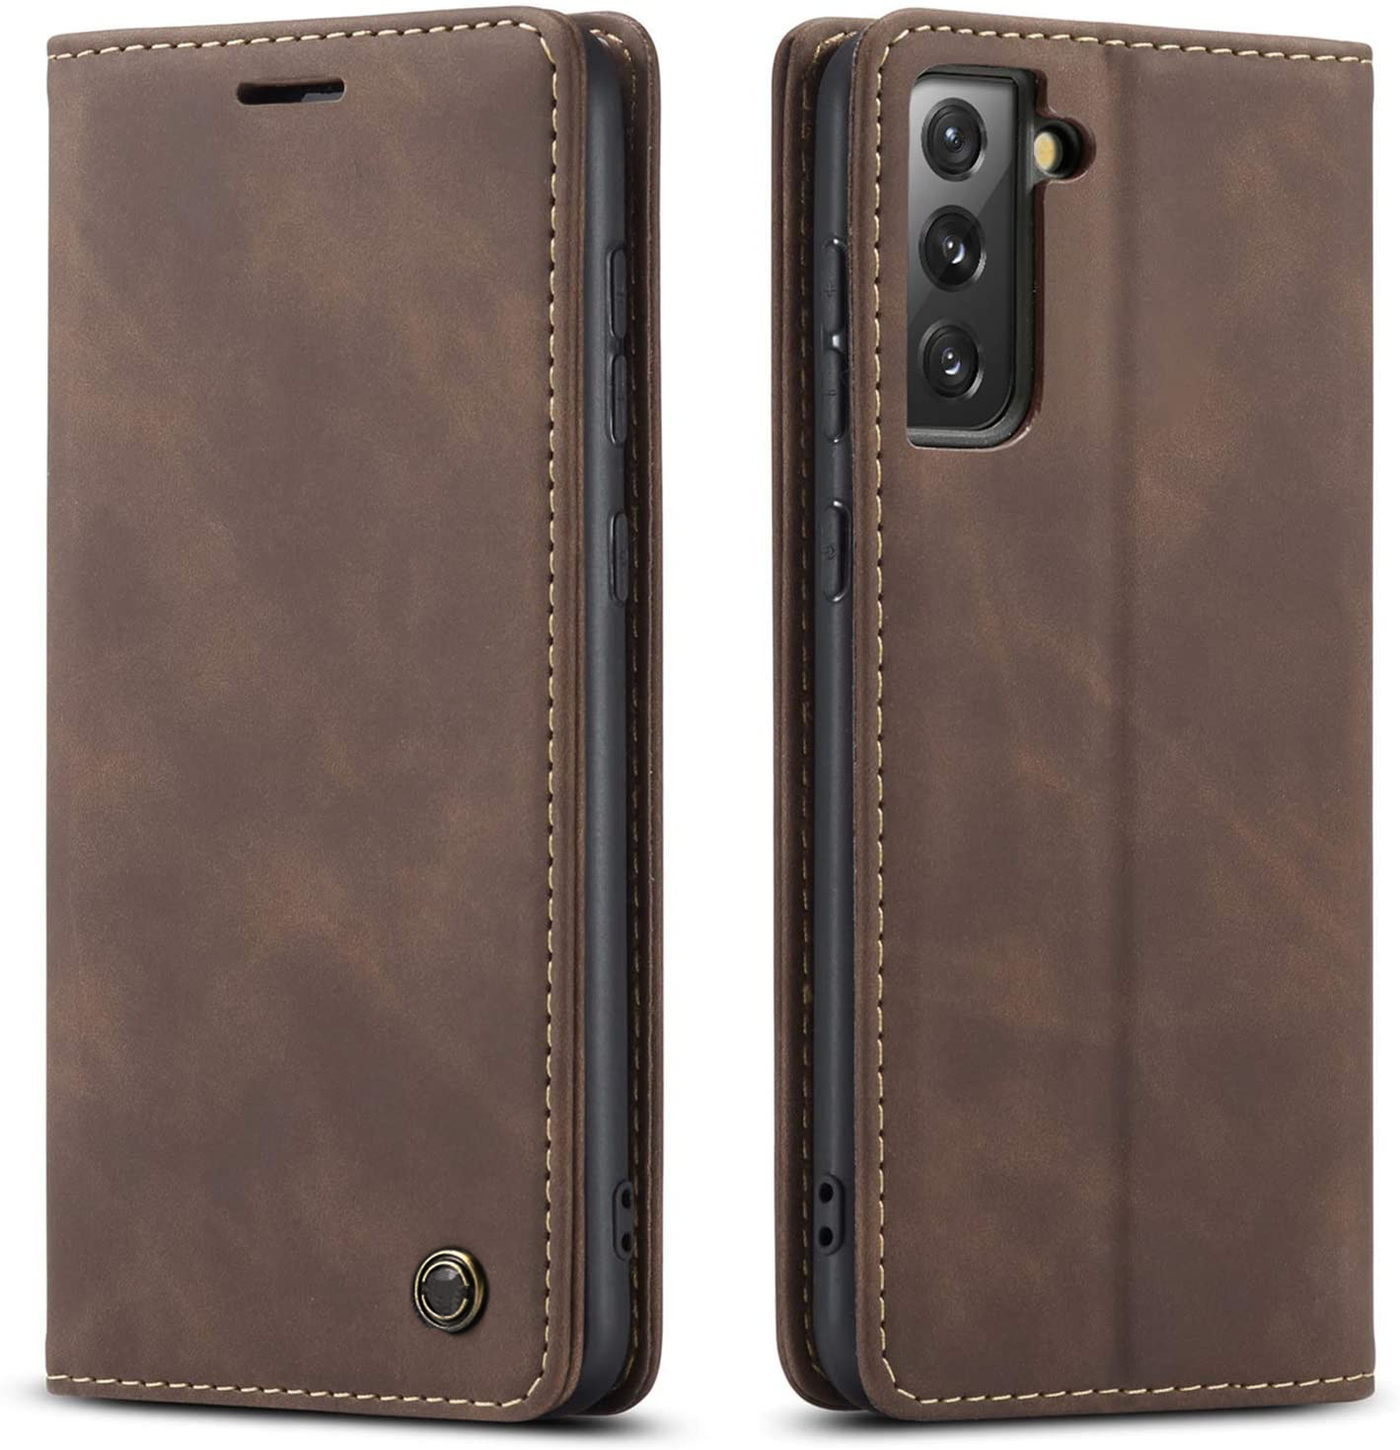 Samsung Galaxy S21 Plus 5G coffee color leather wallet flip cover case By excelsior